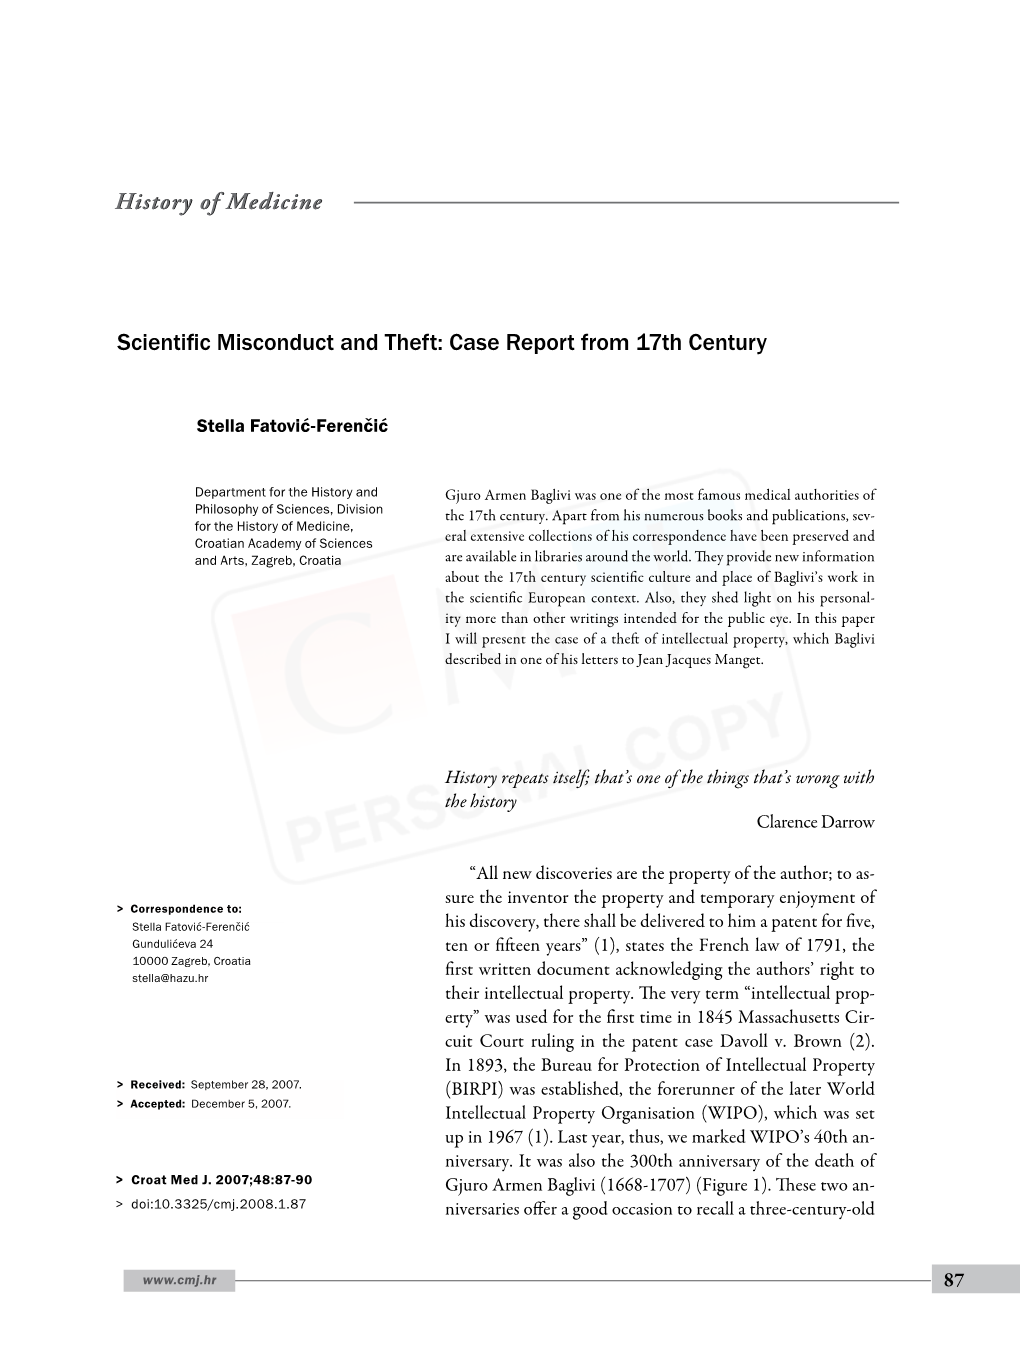 Scientific Misconduct and Theft: Case Report from 17Th Century